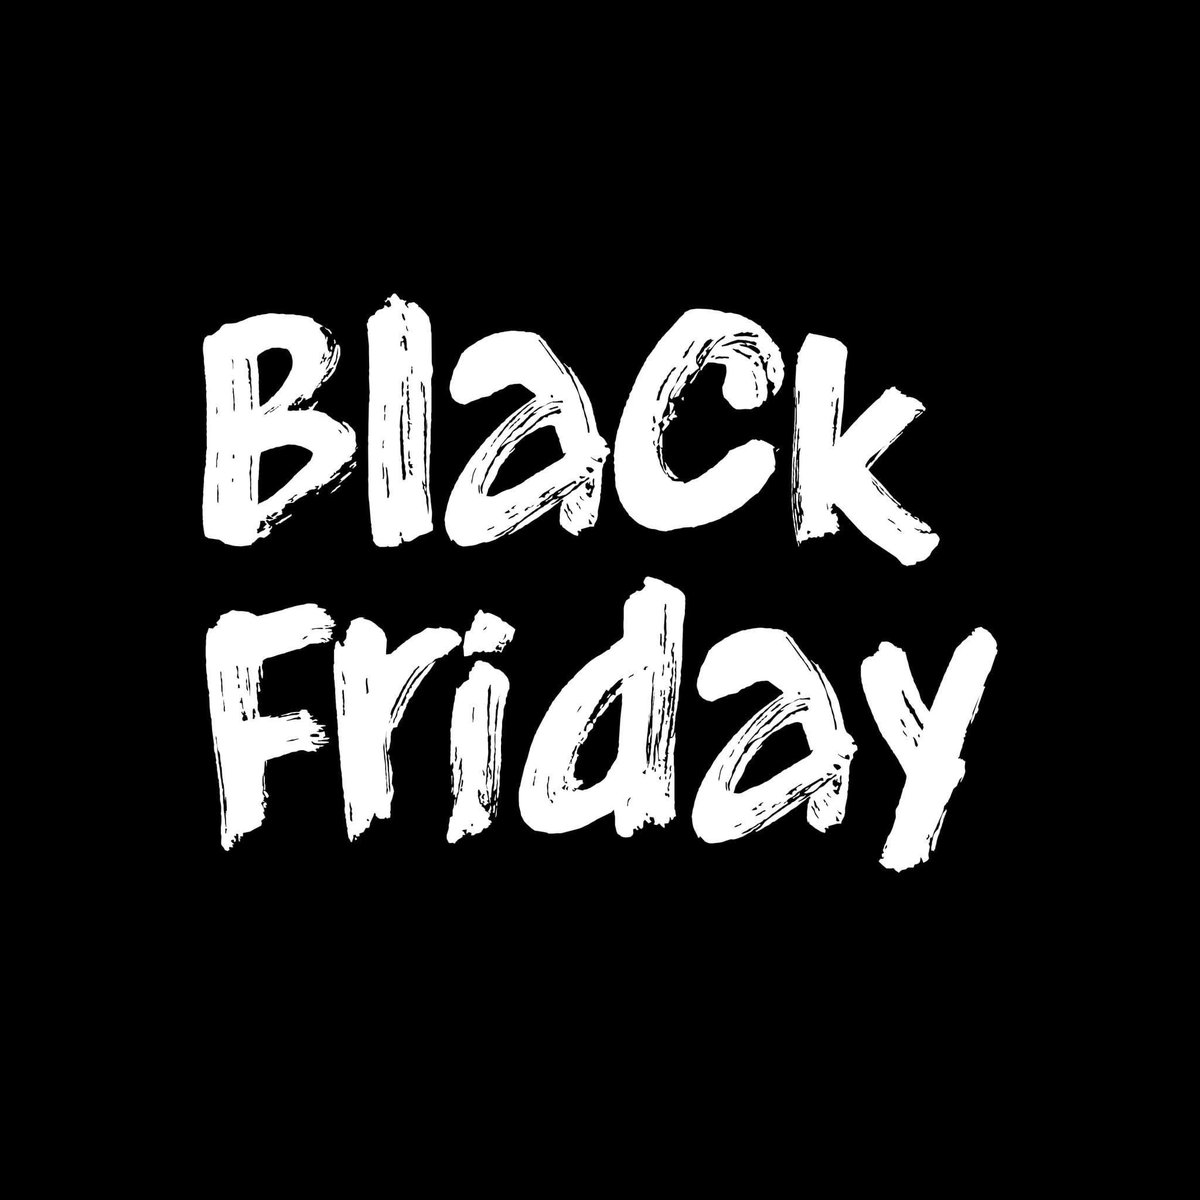 It's #BlackFriday! 🏴 

We're sharing some great deals to help you plan your next short break in Northern Ireland. 

If you've spotted some great offers, post a comment below! 💬

@HastingsHotels 
20% off accommodation gift vouchers

@belmorecourt 
Stay & Dine from £59pps